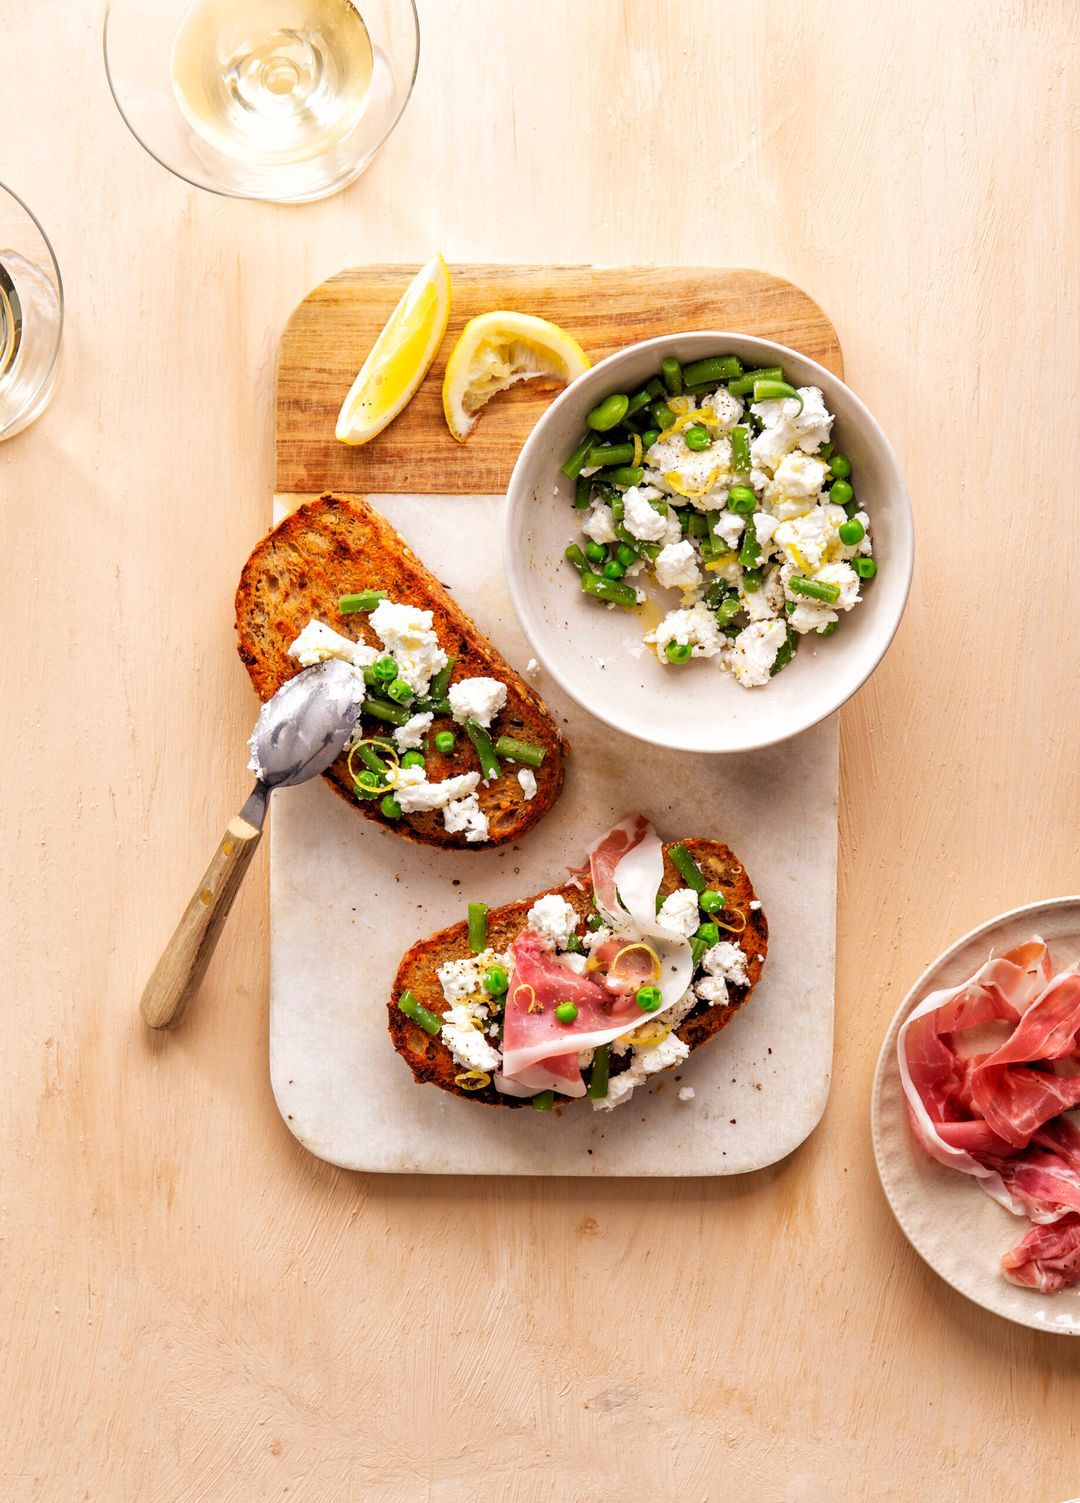 Sourdough toast with beans and goat cheese